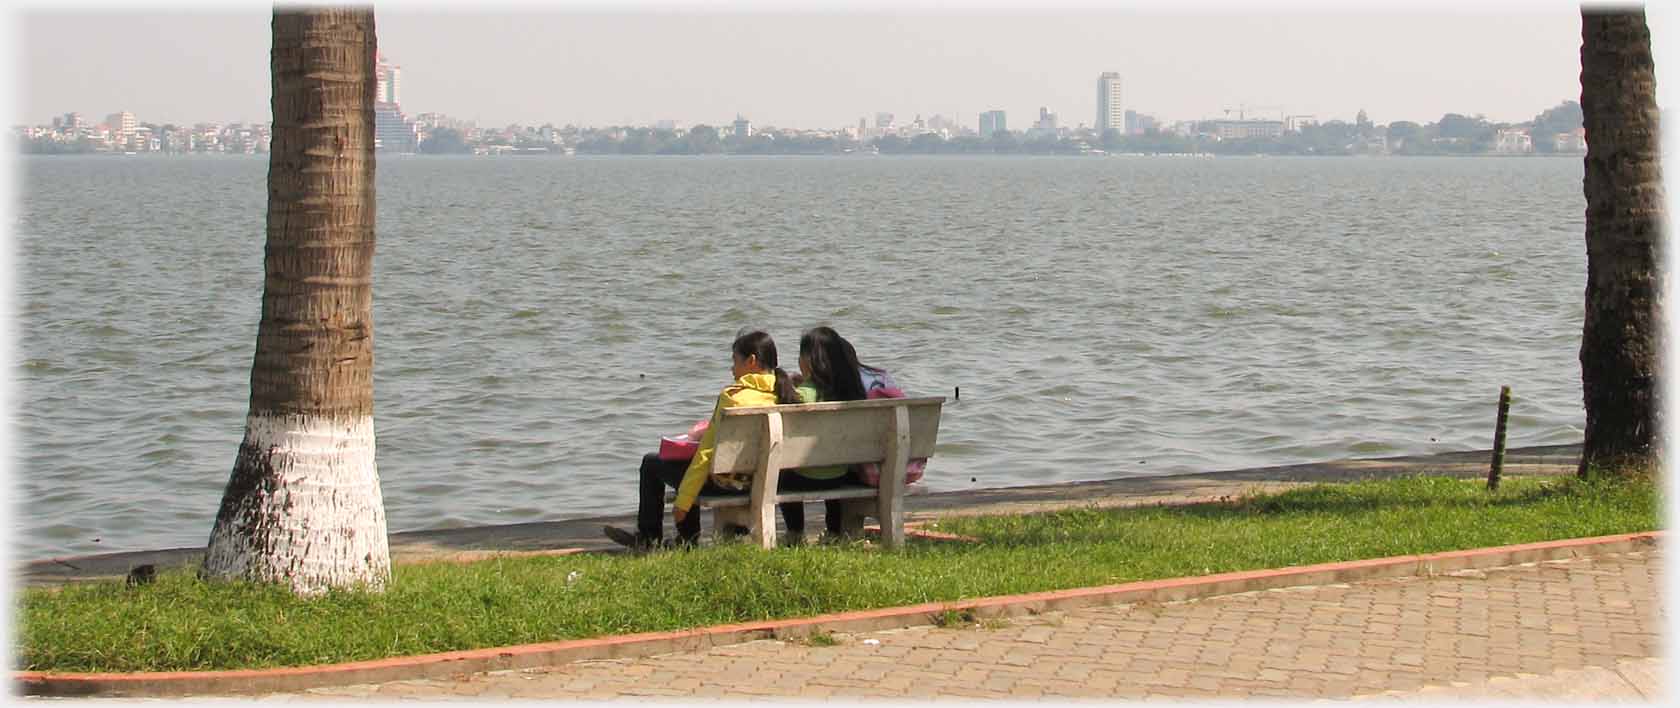 Two younger girls on seat looking out across the lake towards city centre skyline.